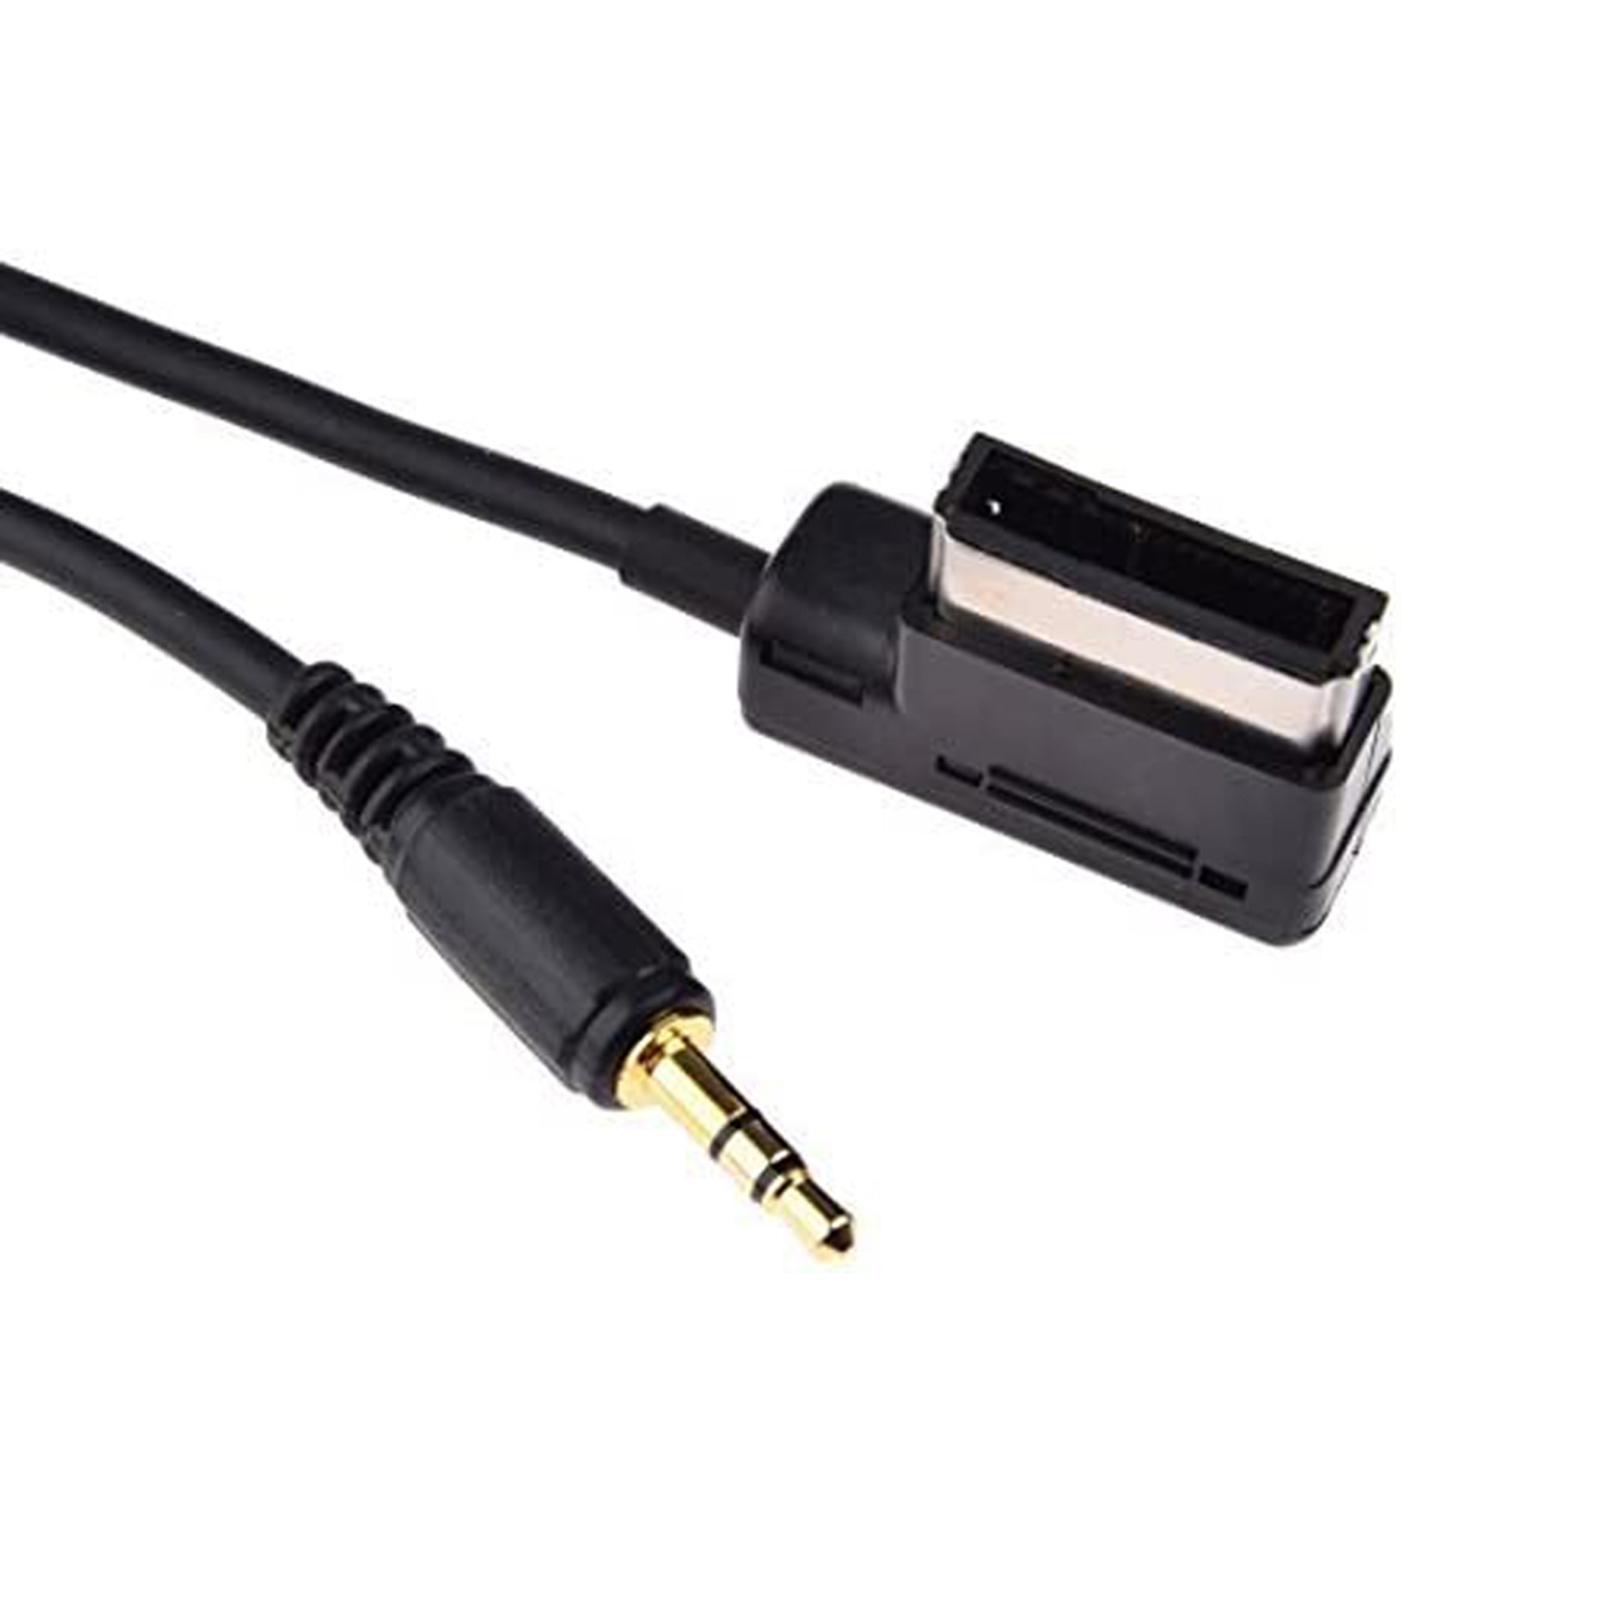 Music Interface AMI AUX 3.5mm Jack AUX in MP3 Adapter Cable 2M for